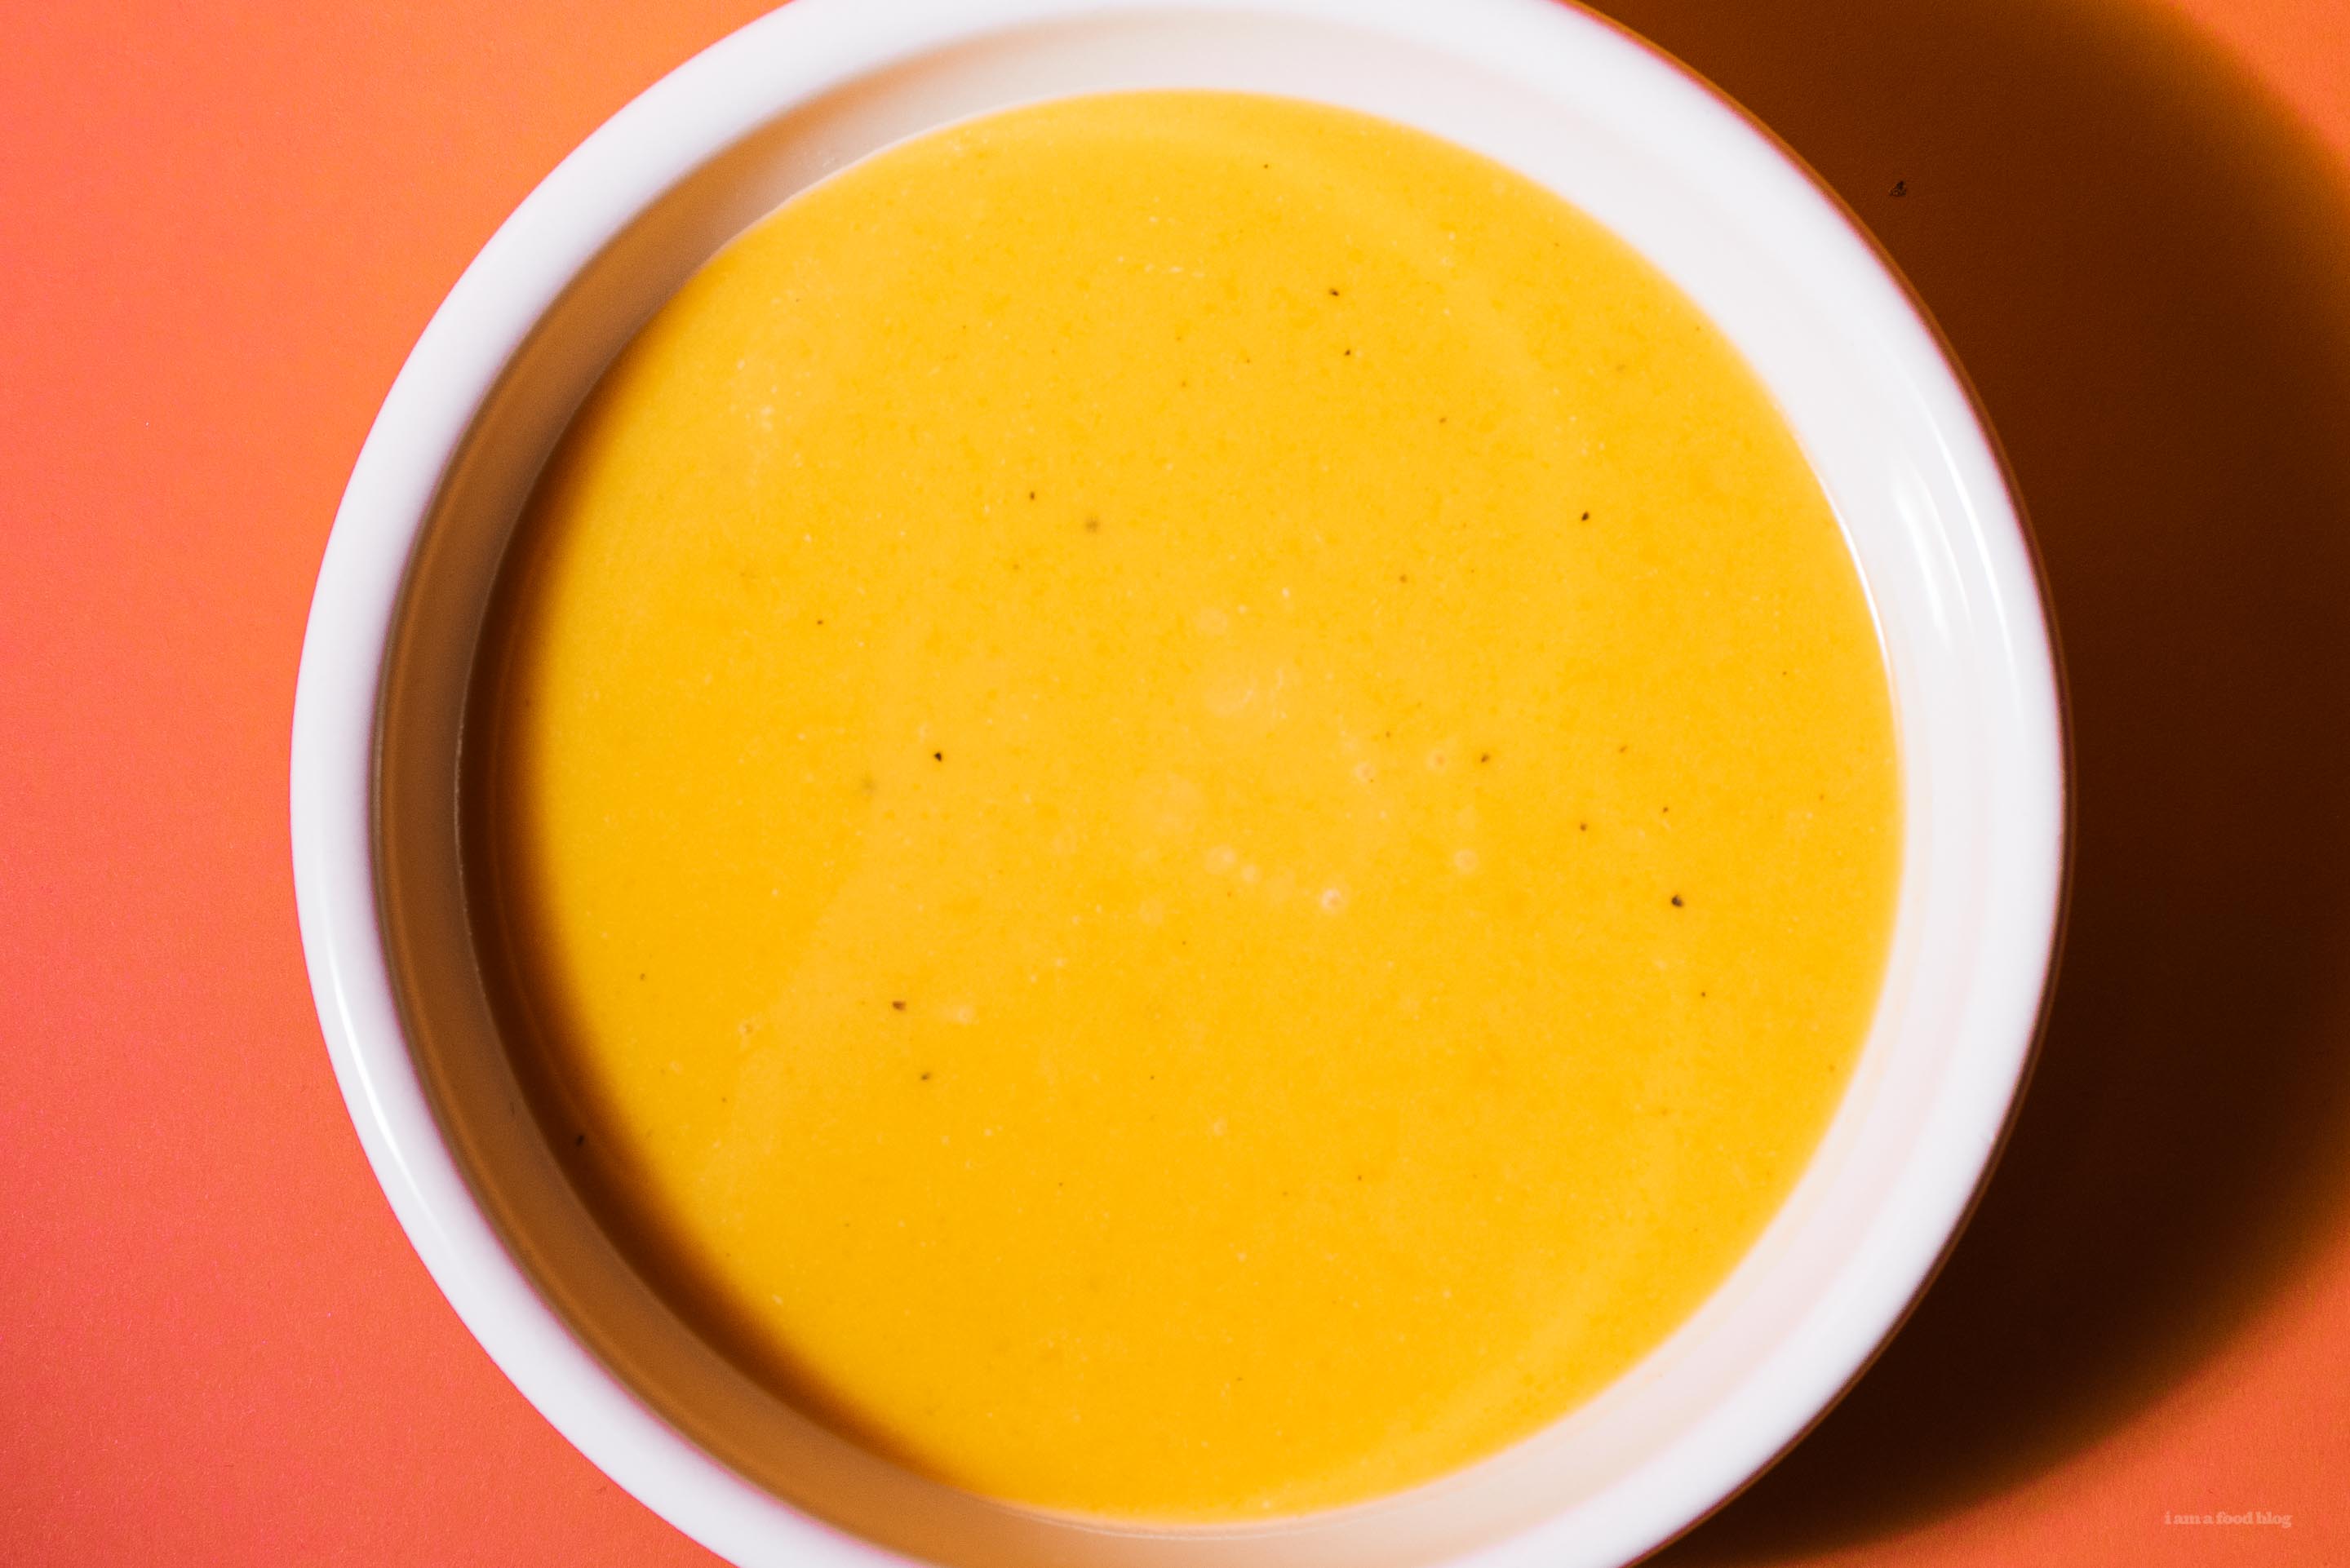 Homemade Soup is Easier Than You Think with this Instant Pot Ginger Coconut Butternut Squash Soup Recipe